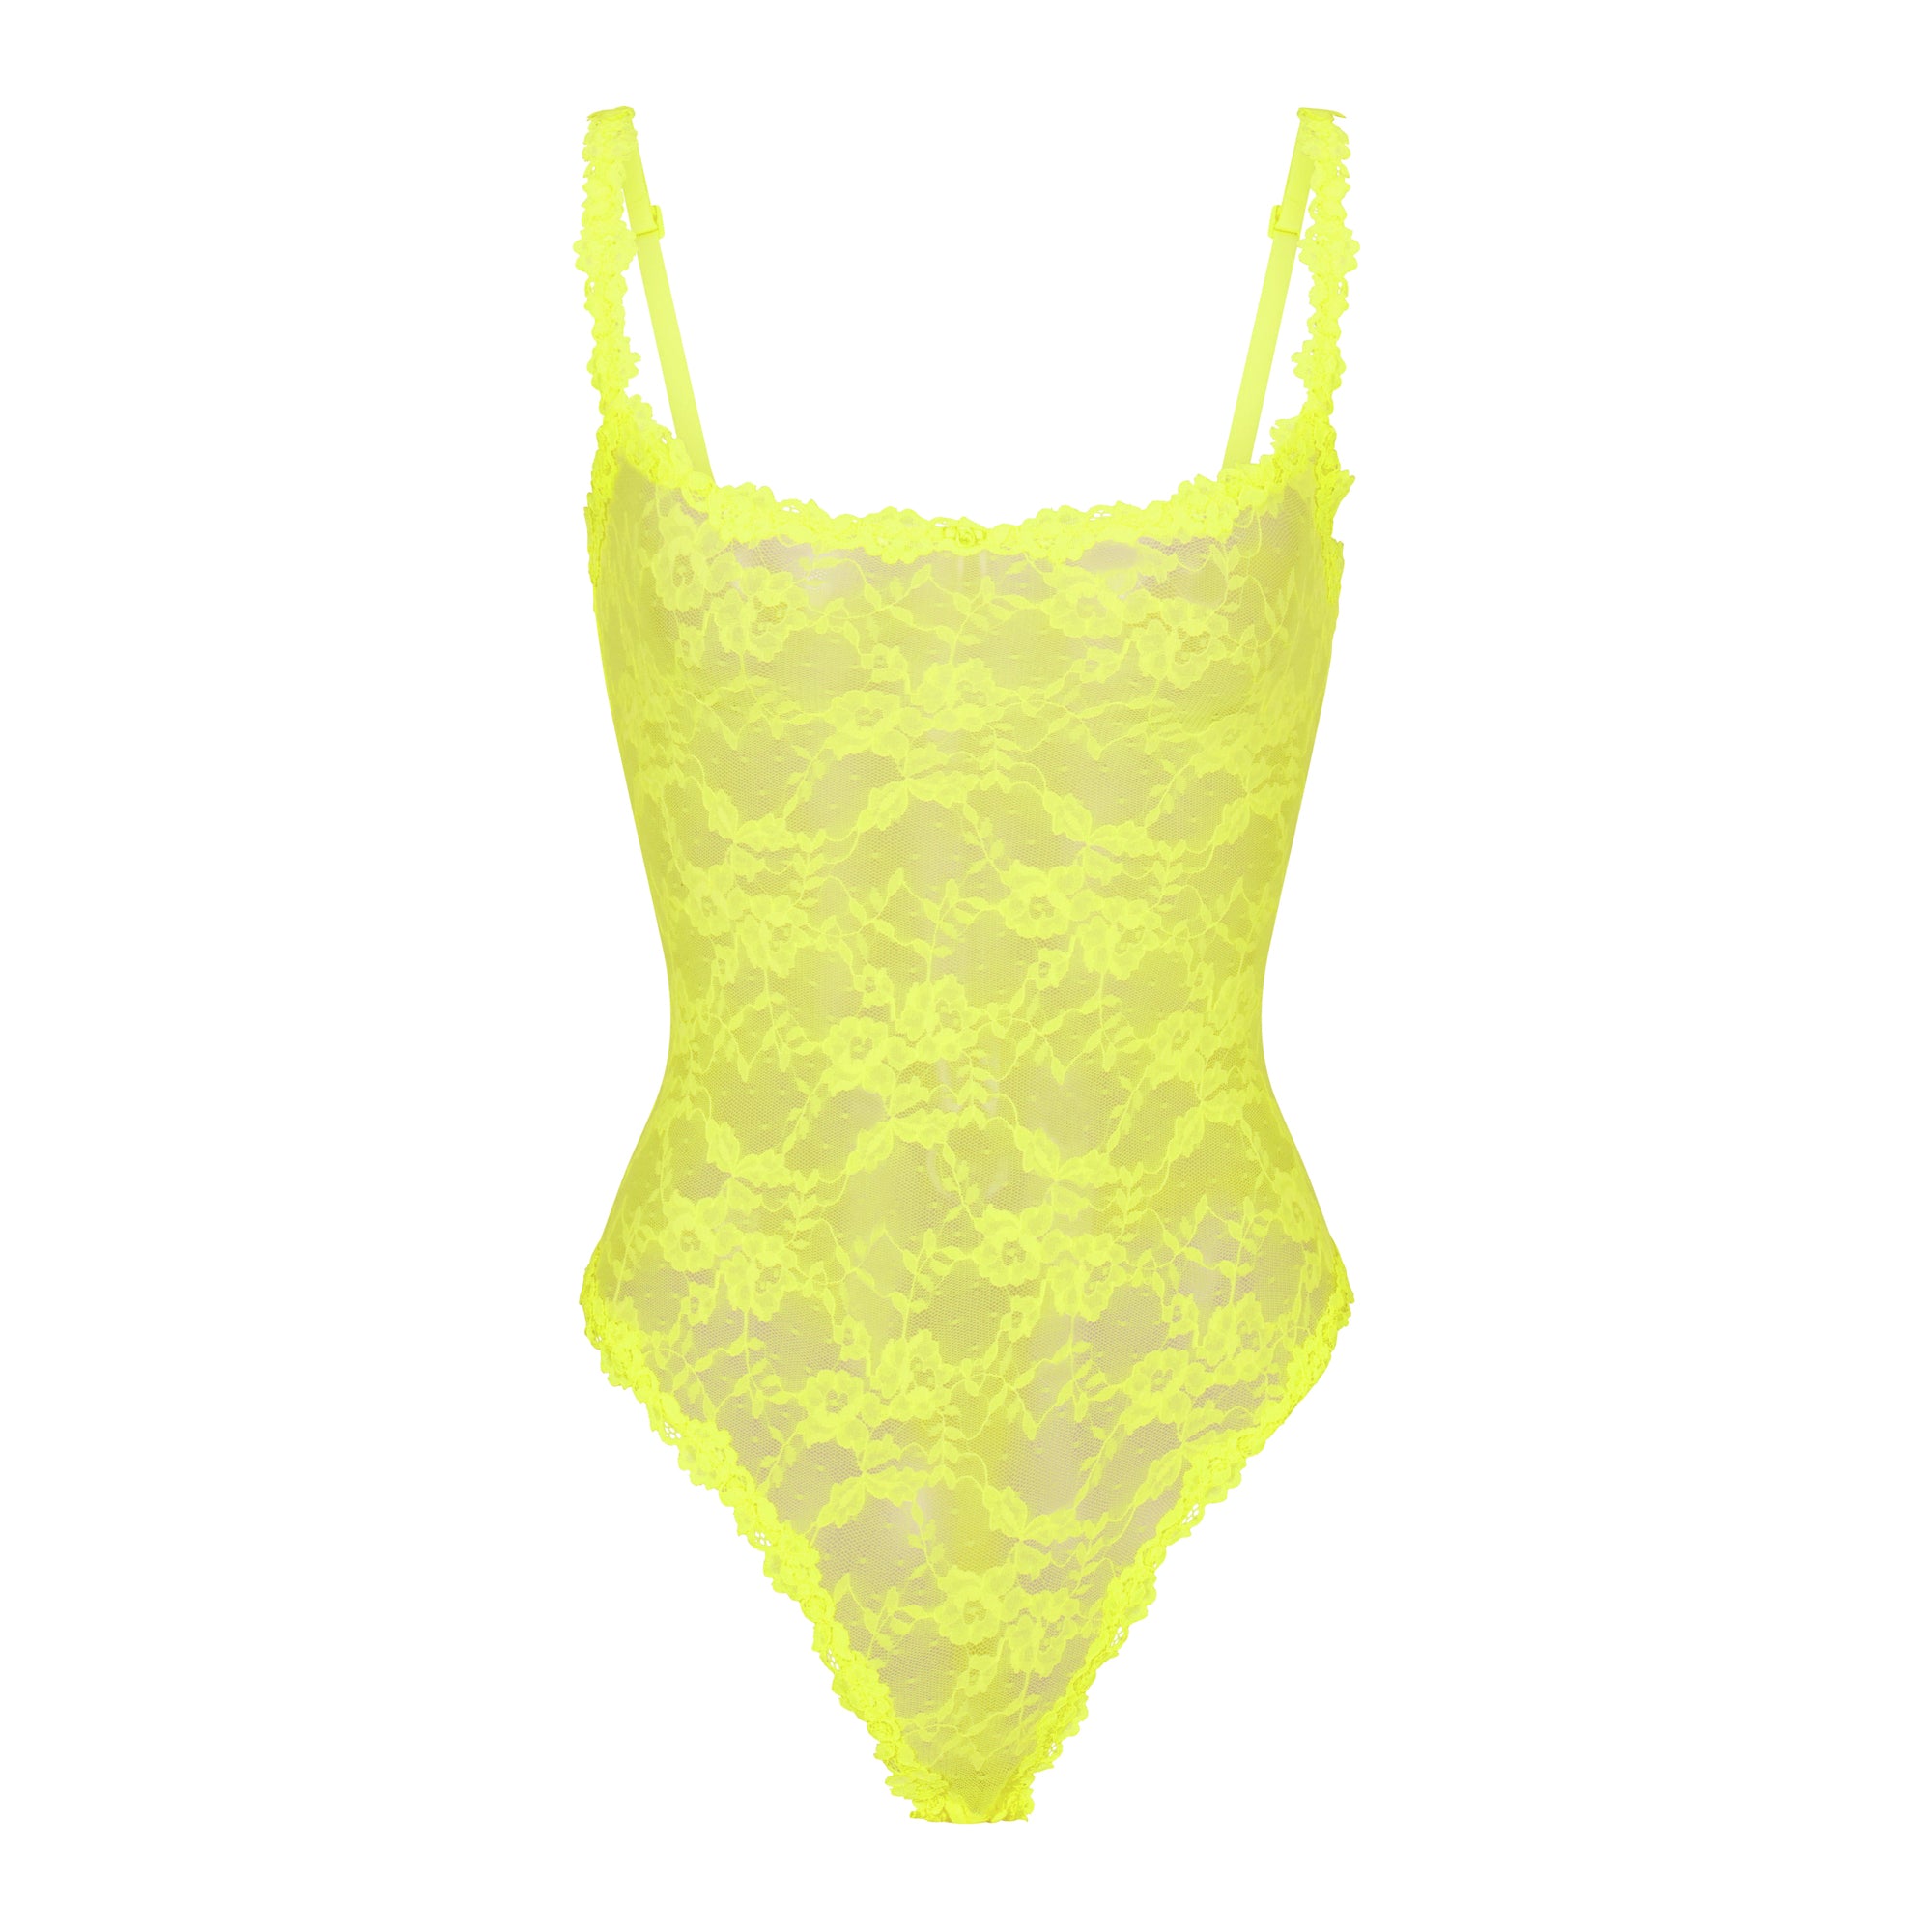 STRETCH LACE THONG BODYSUIT | YELLOW HIGHLIGHTER - STRETCH LACE THONG ...